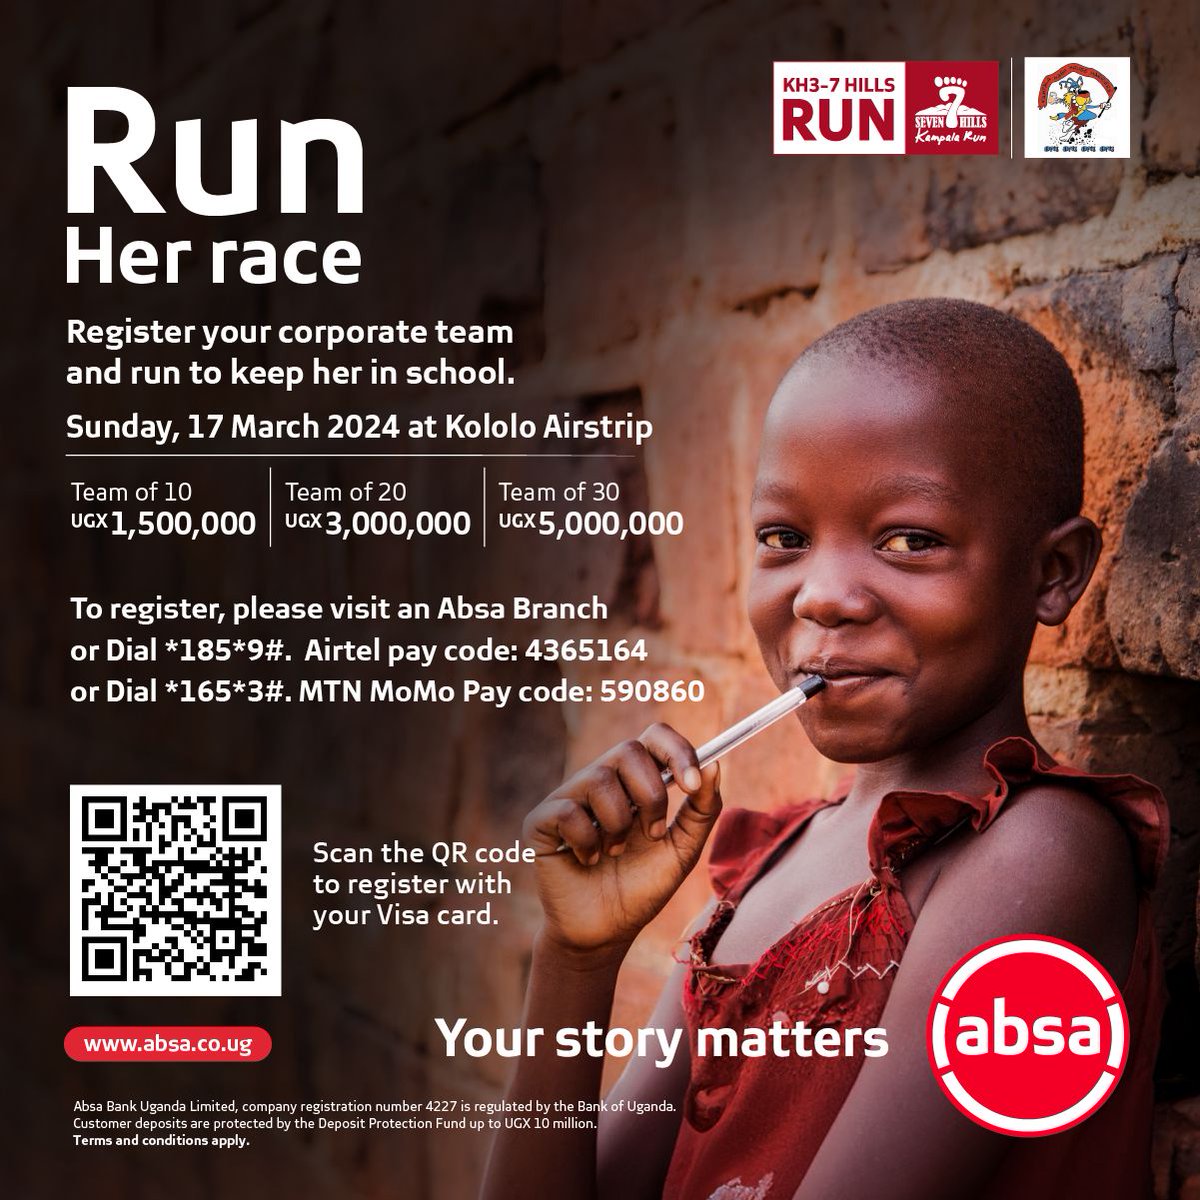 Be the change you want to see. Run her race in the second edition of the @AbsaUganda KH3-7 Hills Run.